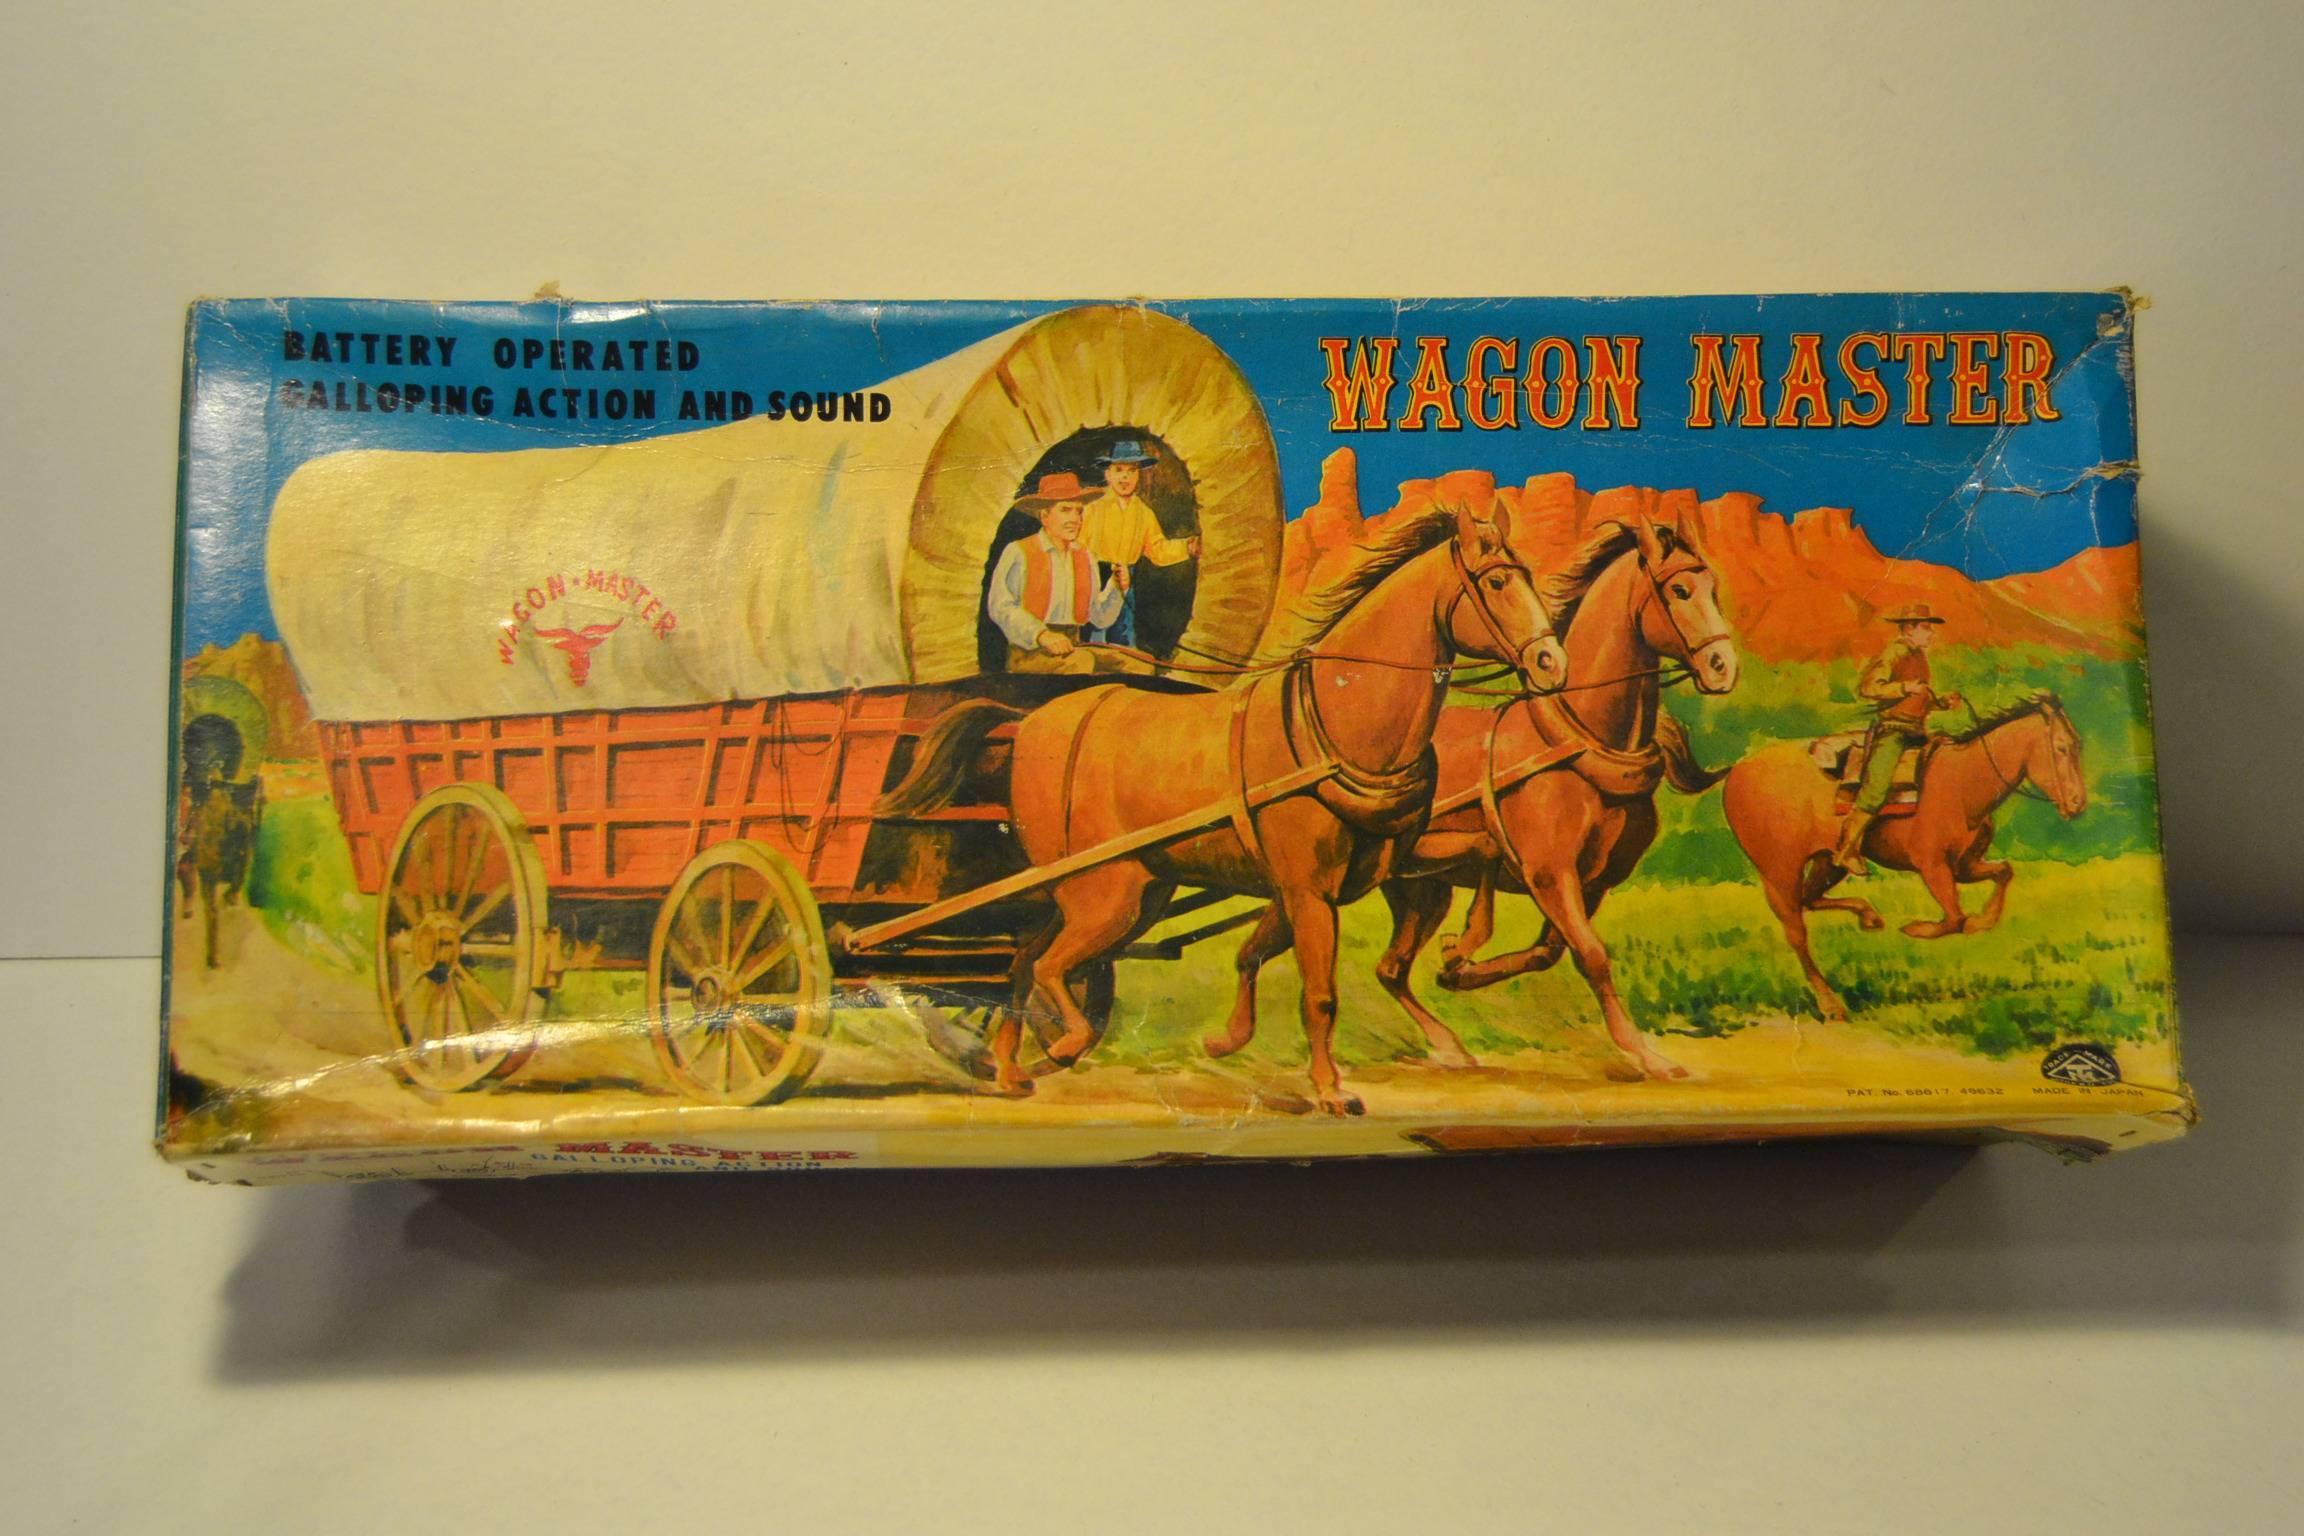 Wagon master, Western chariot battery operated toy with 2 horses.
Made in Japan by Modern toys in the 1960s.
Sill comes with his original box.

The horses galop and make sound, the cowboy driver goes forward and backwards.
Tin cowboy, tin